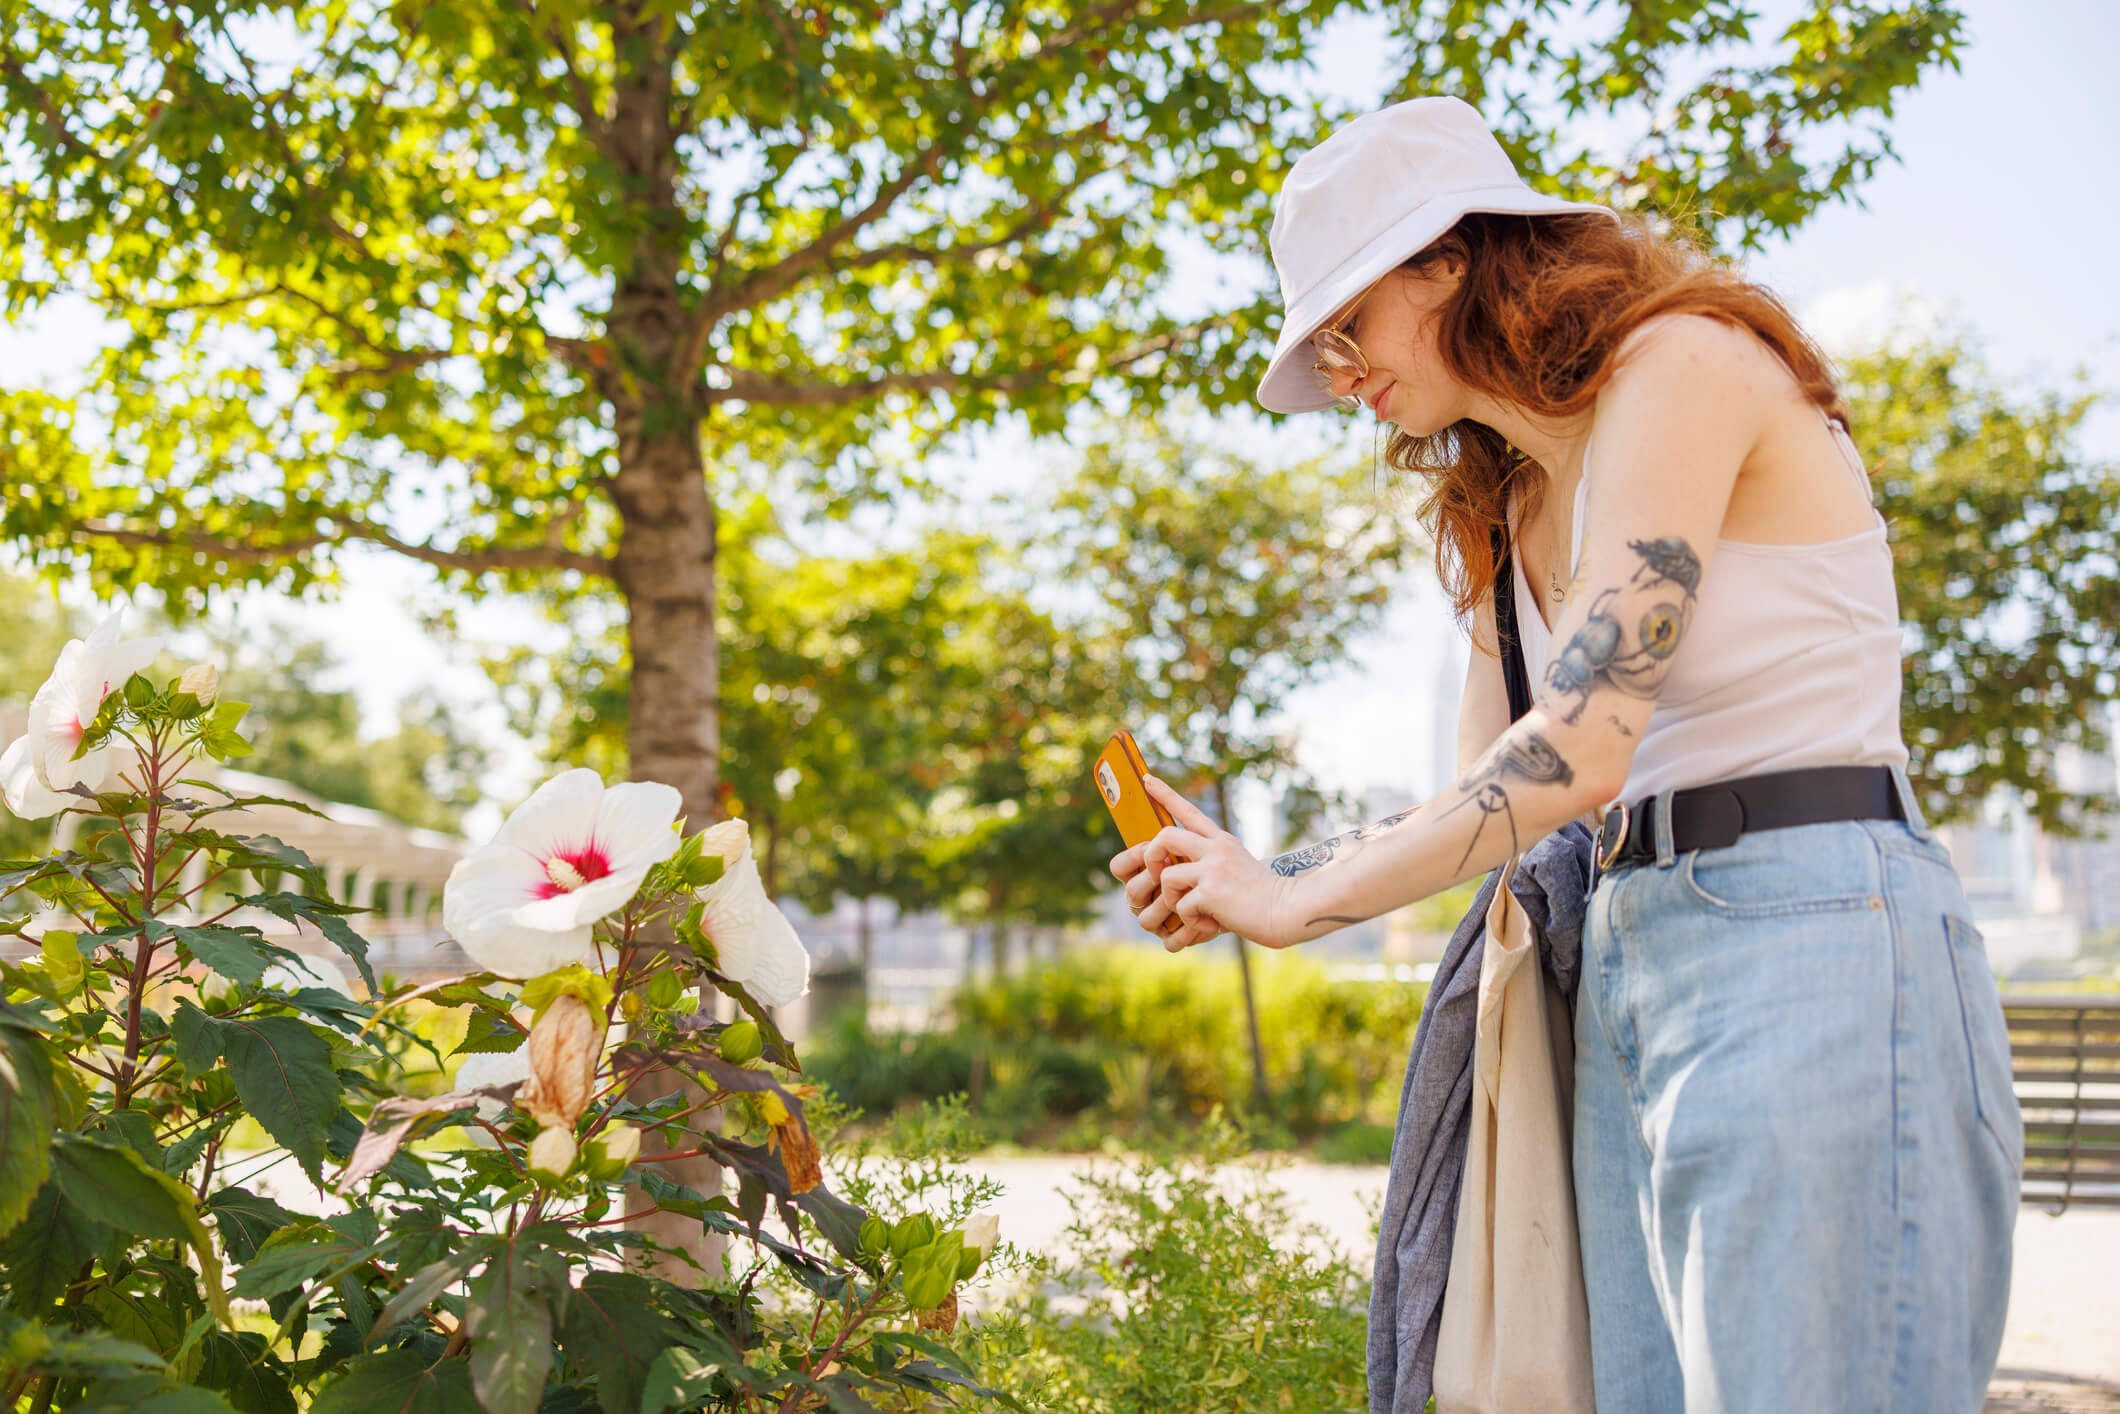 Woman takes photo with her phone of flowers and plants in public park